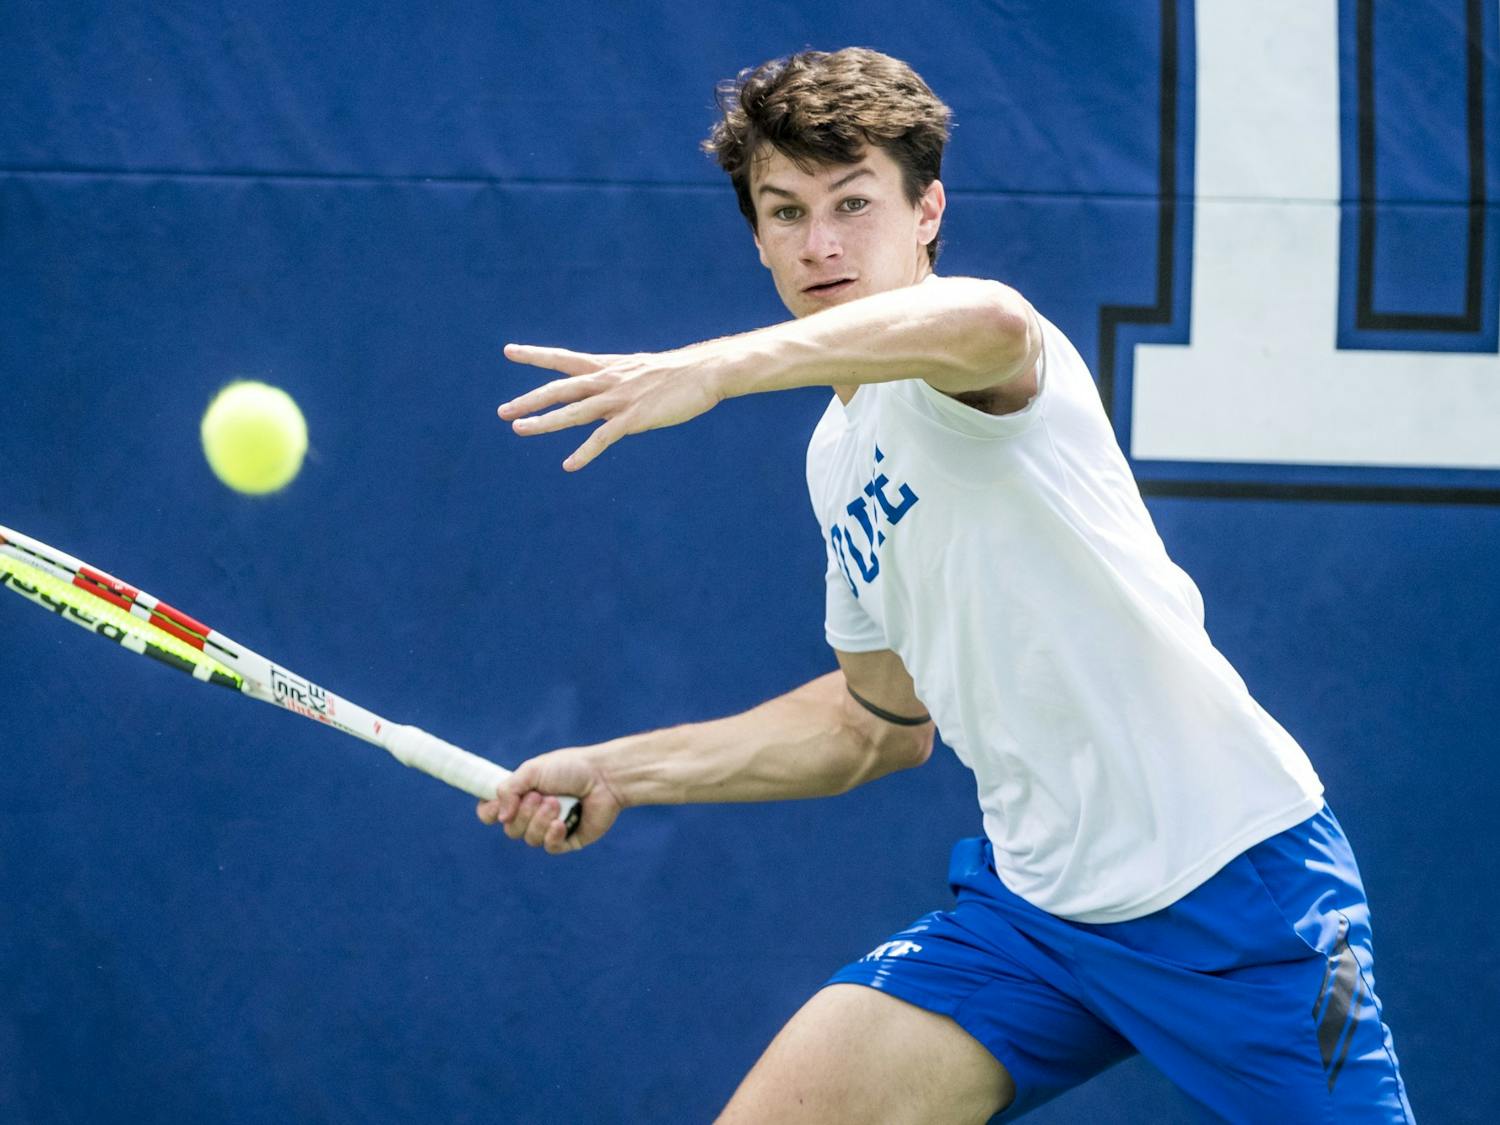 Junior Garrett Johns will be Duke's No. 1 singles player for the second consecutive year.